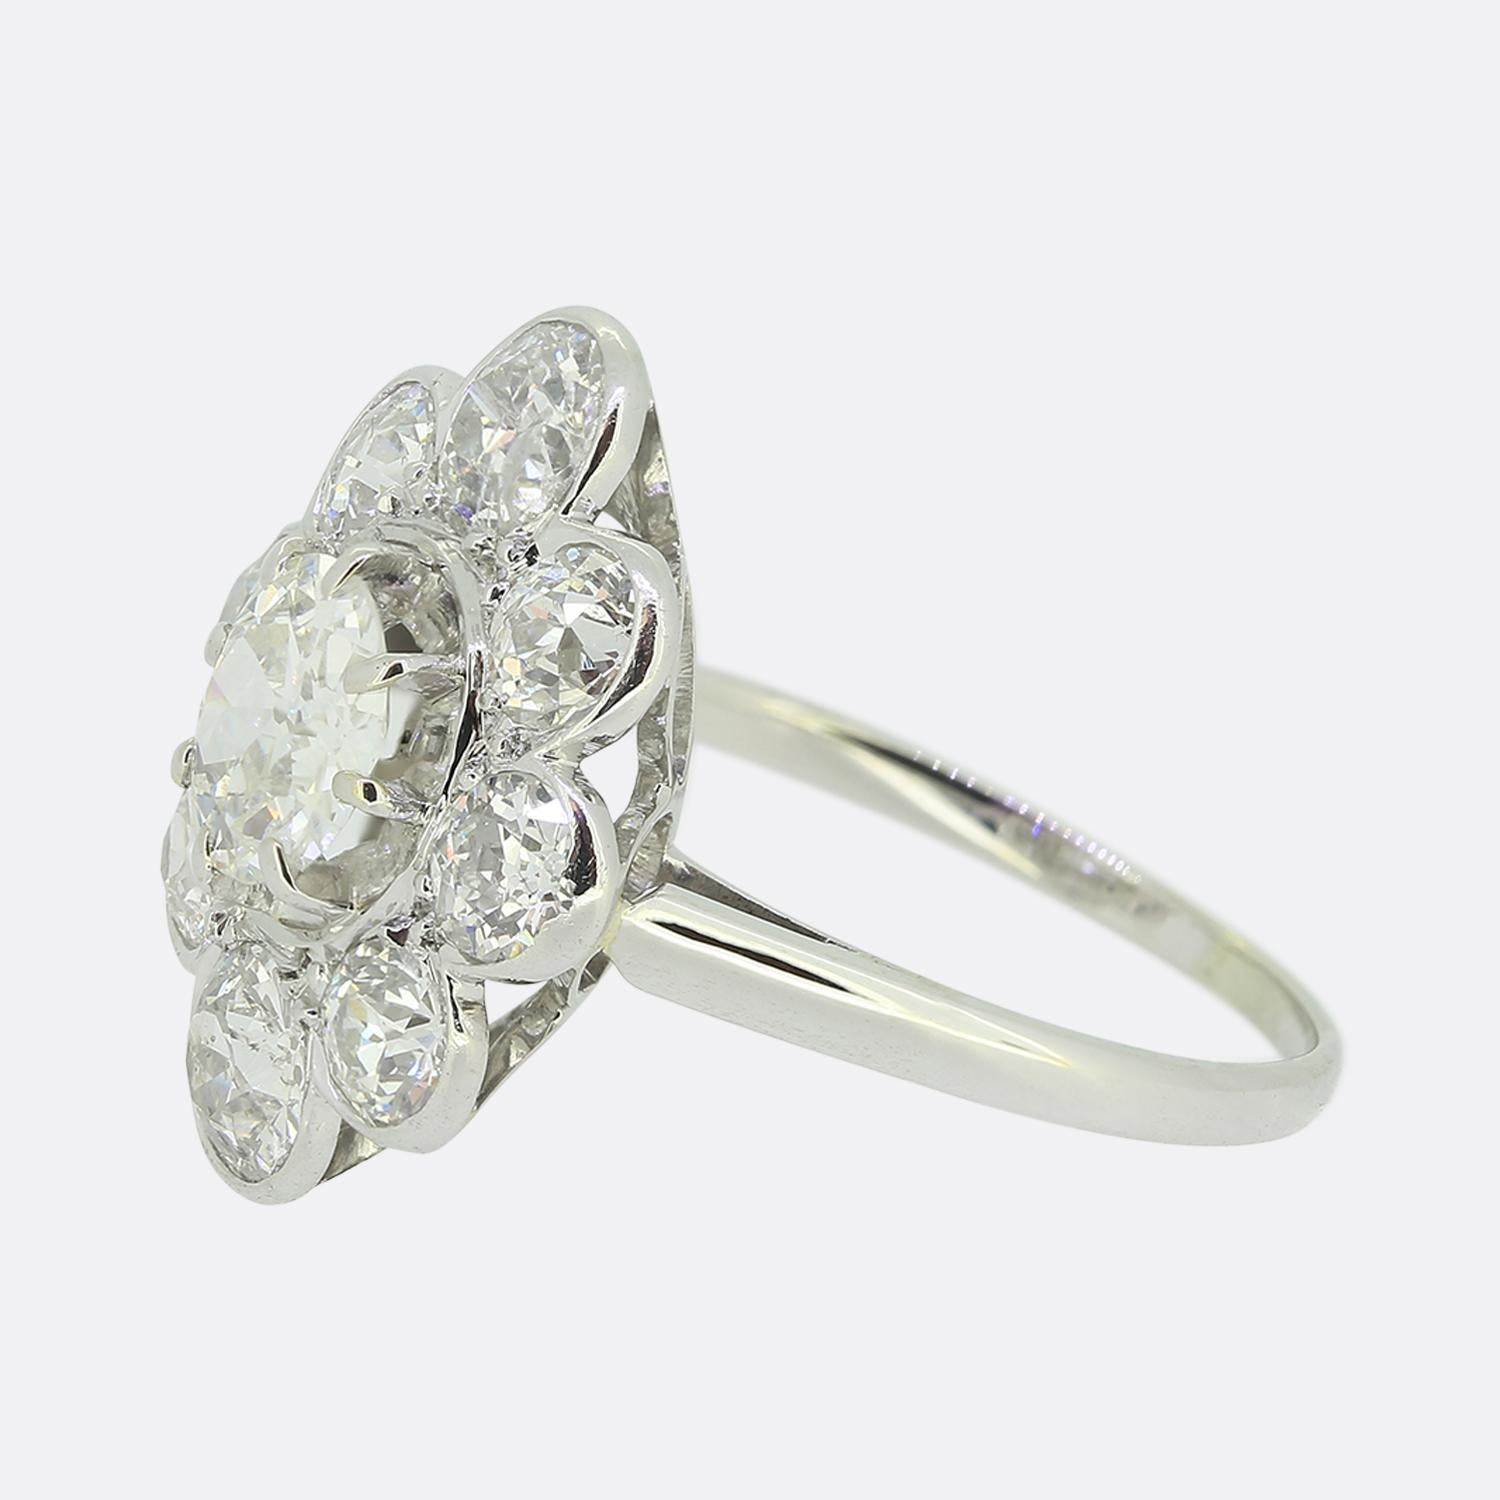 Here we have a fabulous cluster ring crafted in France and featuring a scintillating ensemble of diamonds. At the centre of this vintage piece we find a single round faceted old European cut diamond which sits slightly risen in an 8 clawed setting.